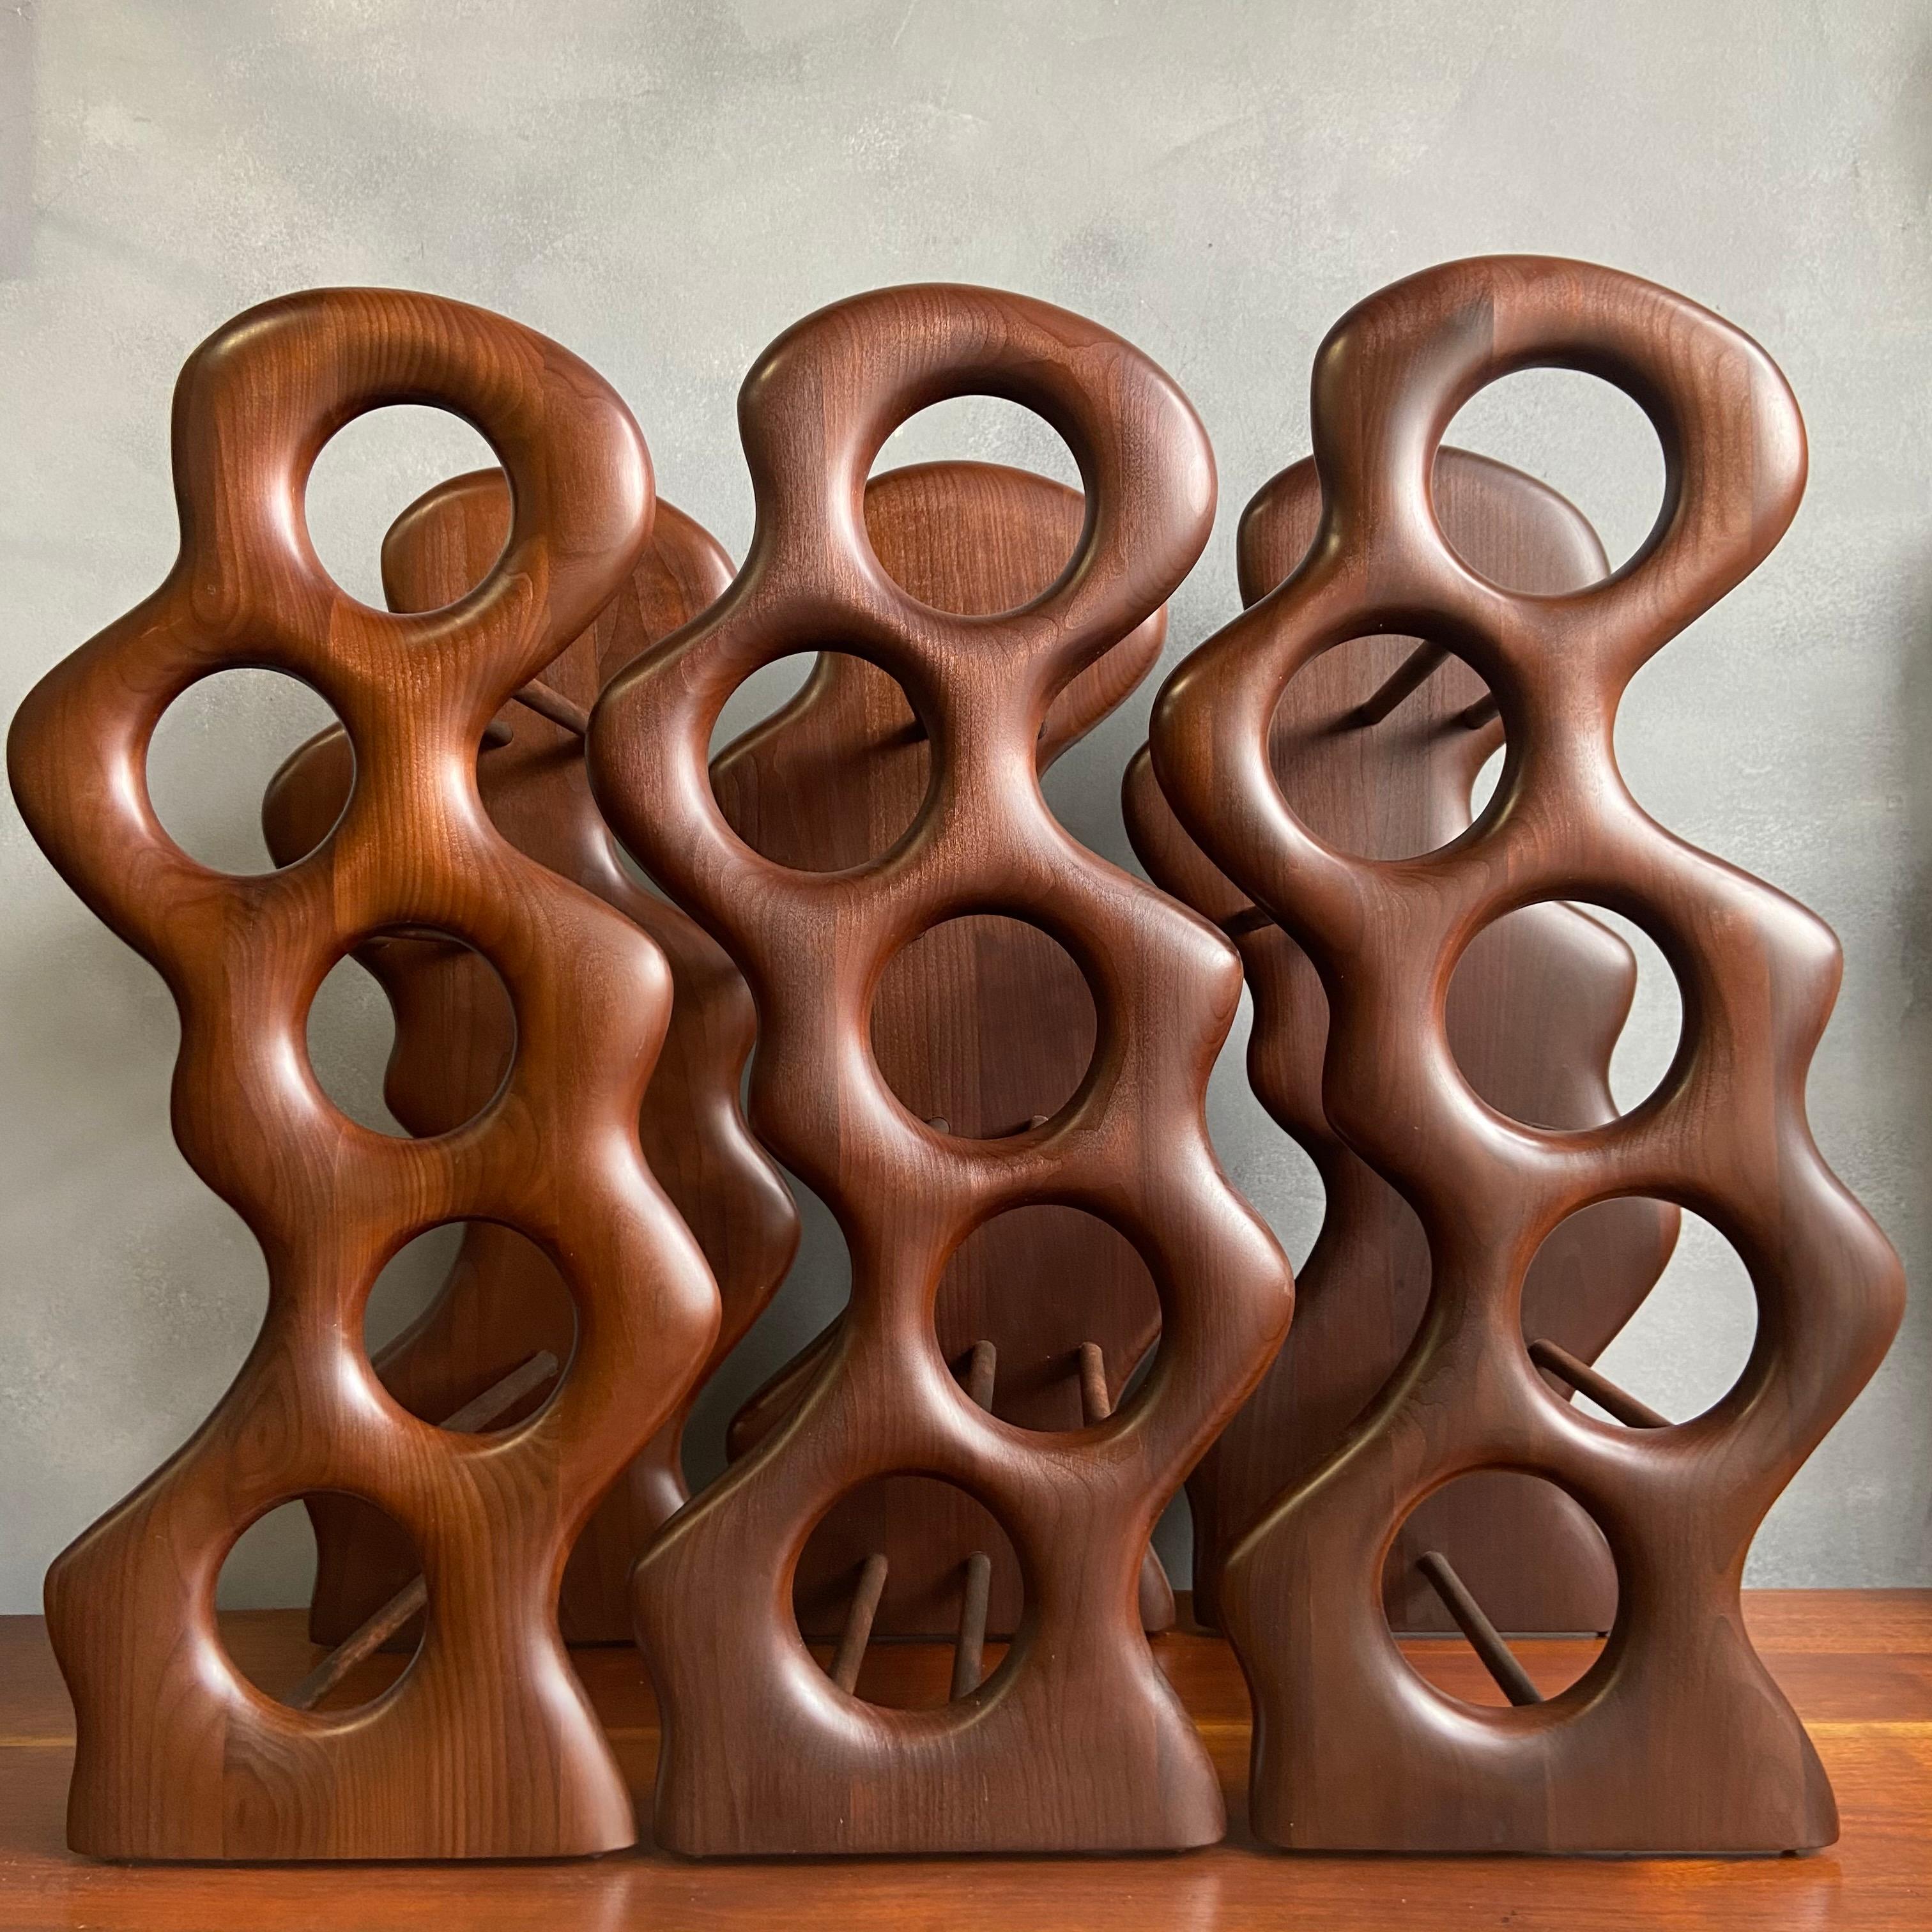 For your consideration are these beautifully sculpted wine racks by Master Craftsman Dean Santner. Santner designs are part of the American Modern Craft movement along side Wendell Castle, Nakashima, Phillip Powell to name a few. This hand sculpted